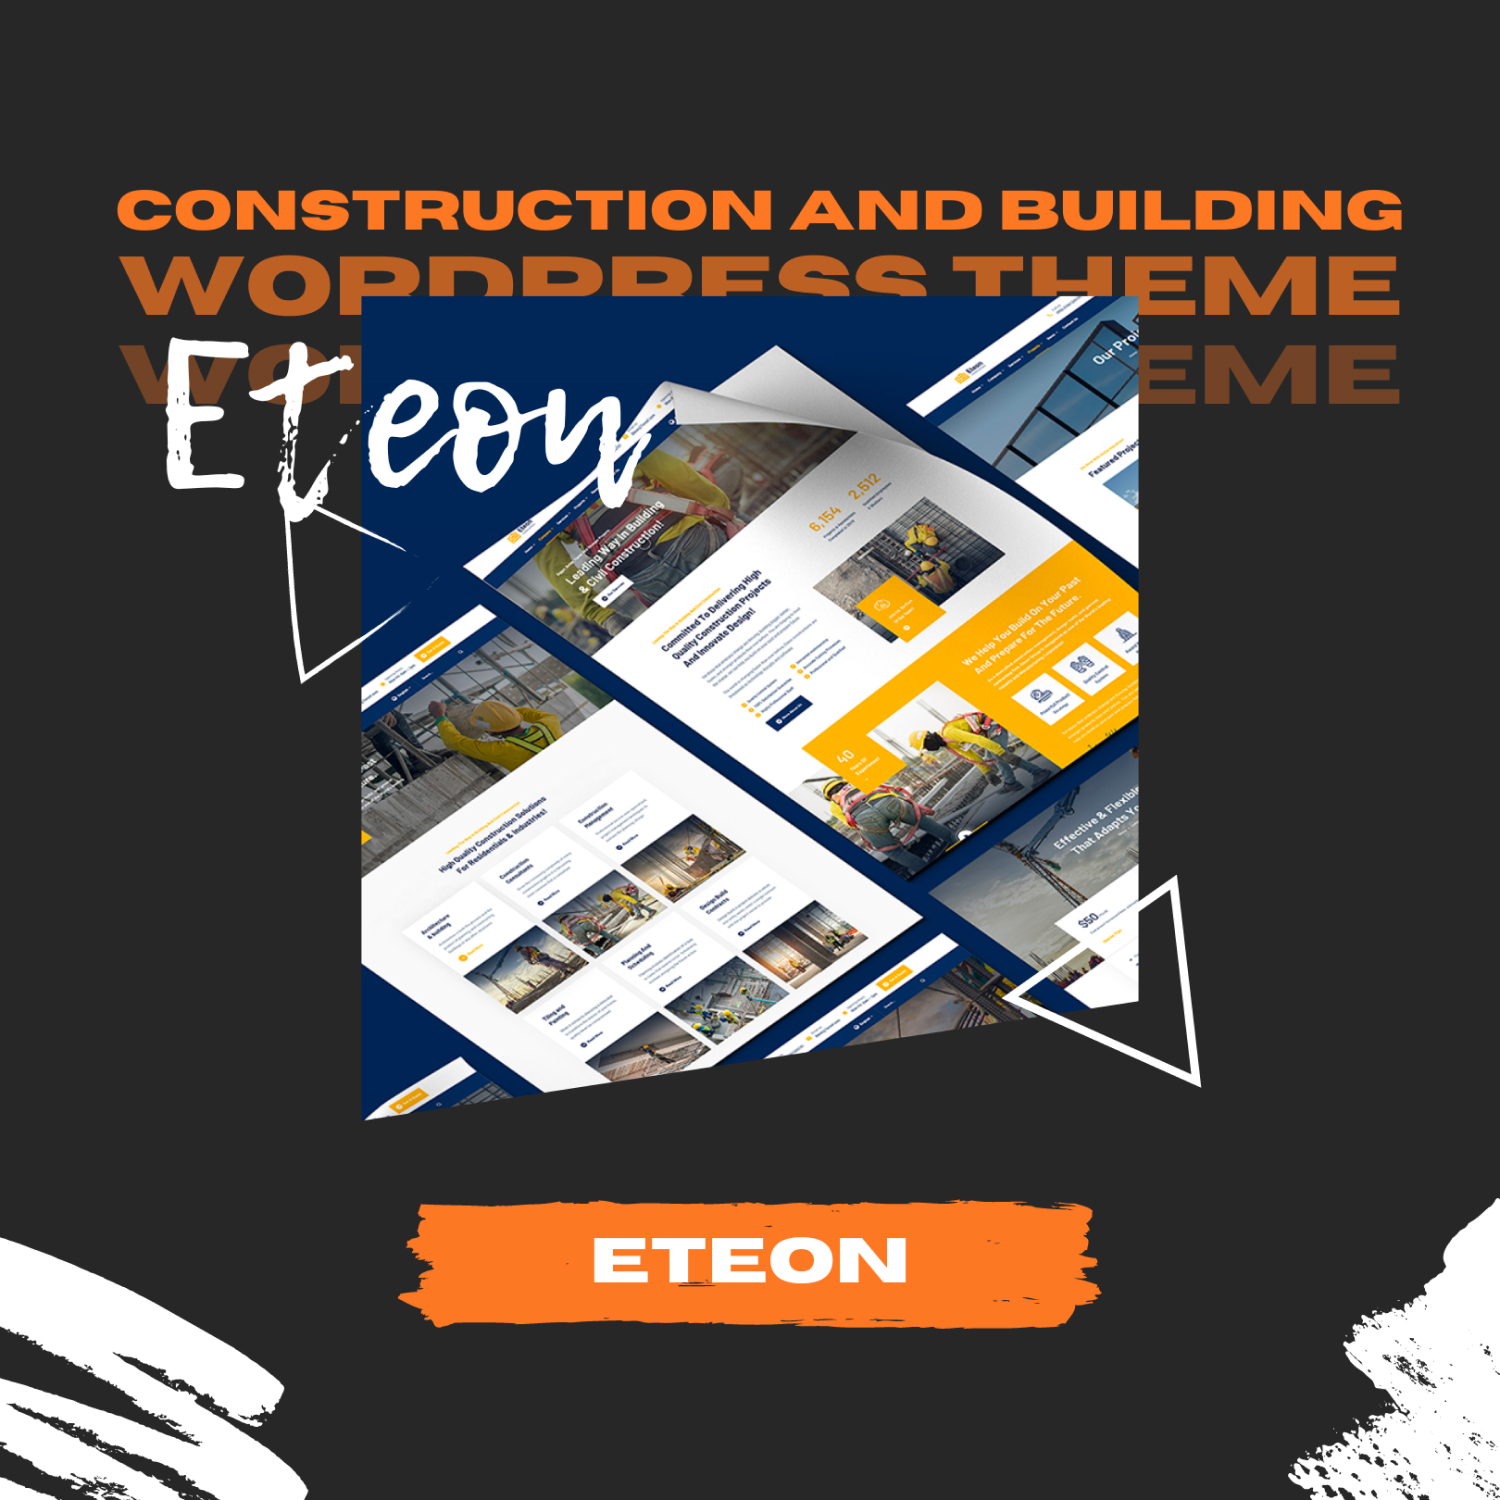 Eteon - Construction And Building WordPress Theme.